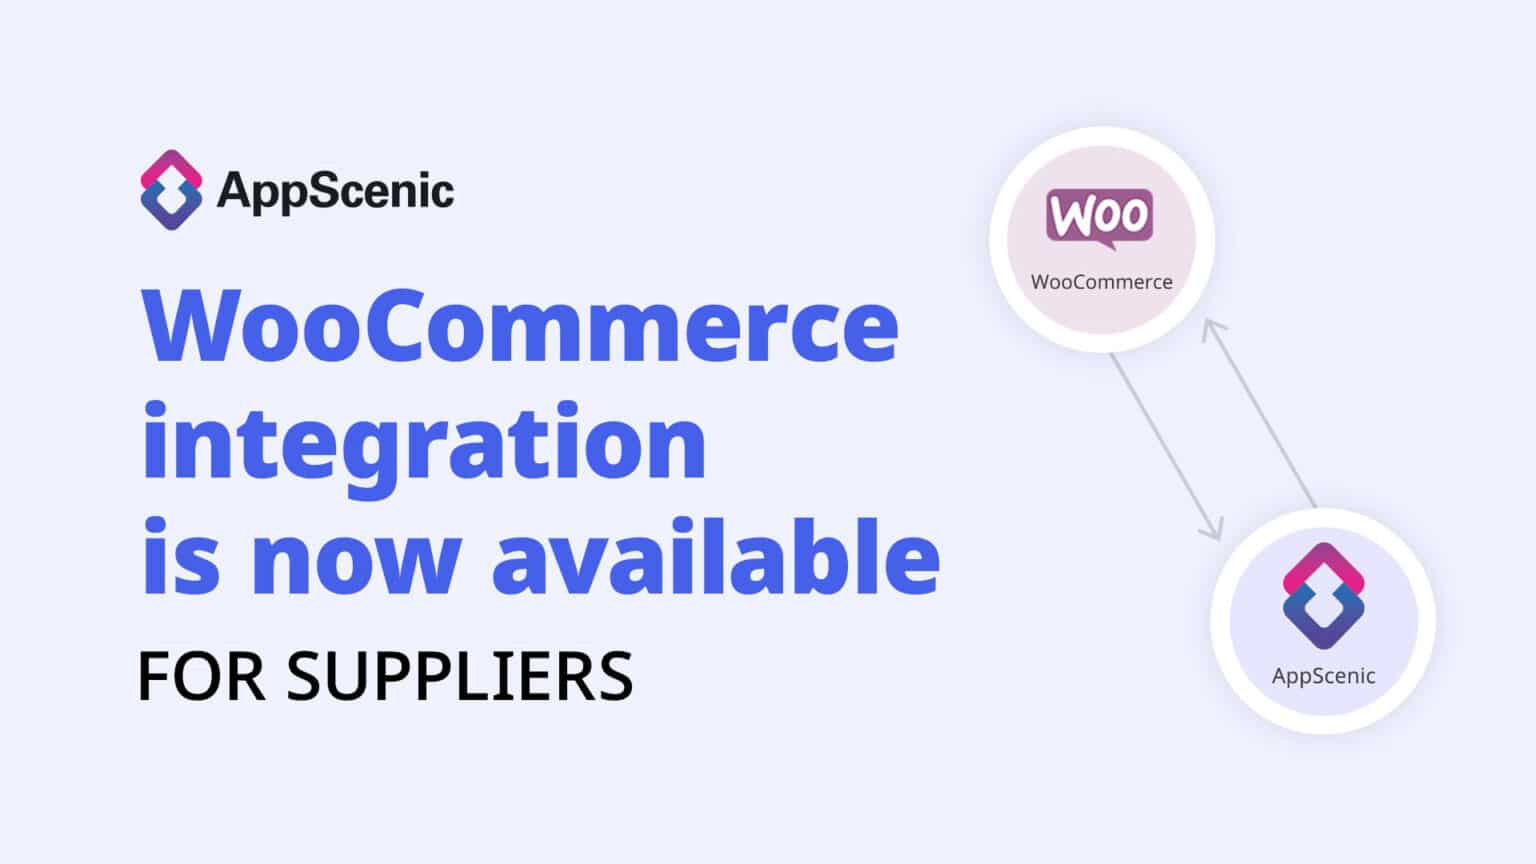 WooCommerce is available for suppliers -  